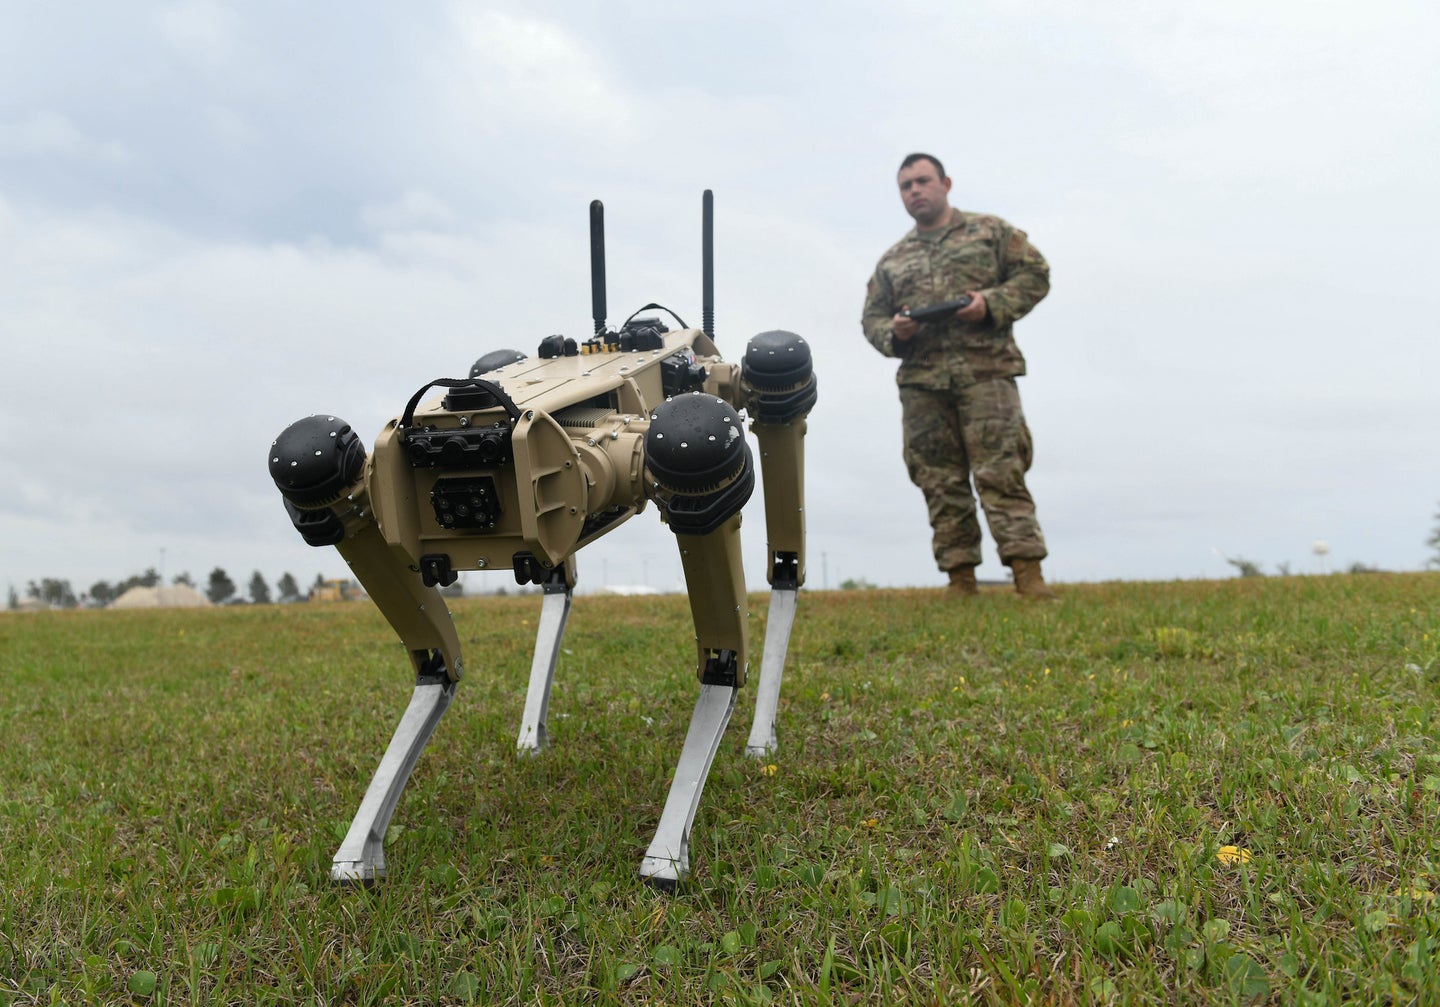 A robotic dog and its handler.